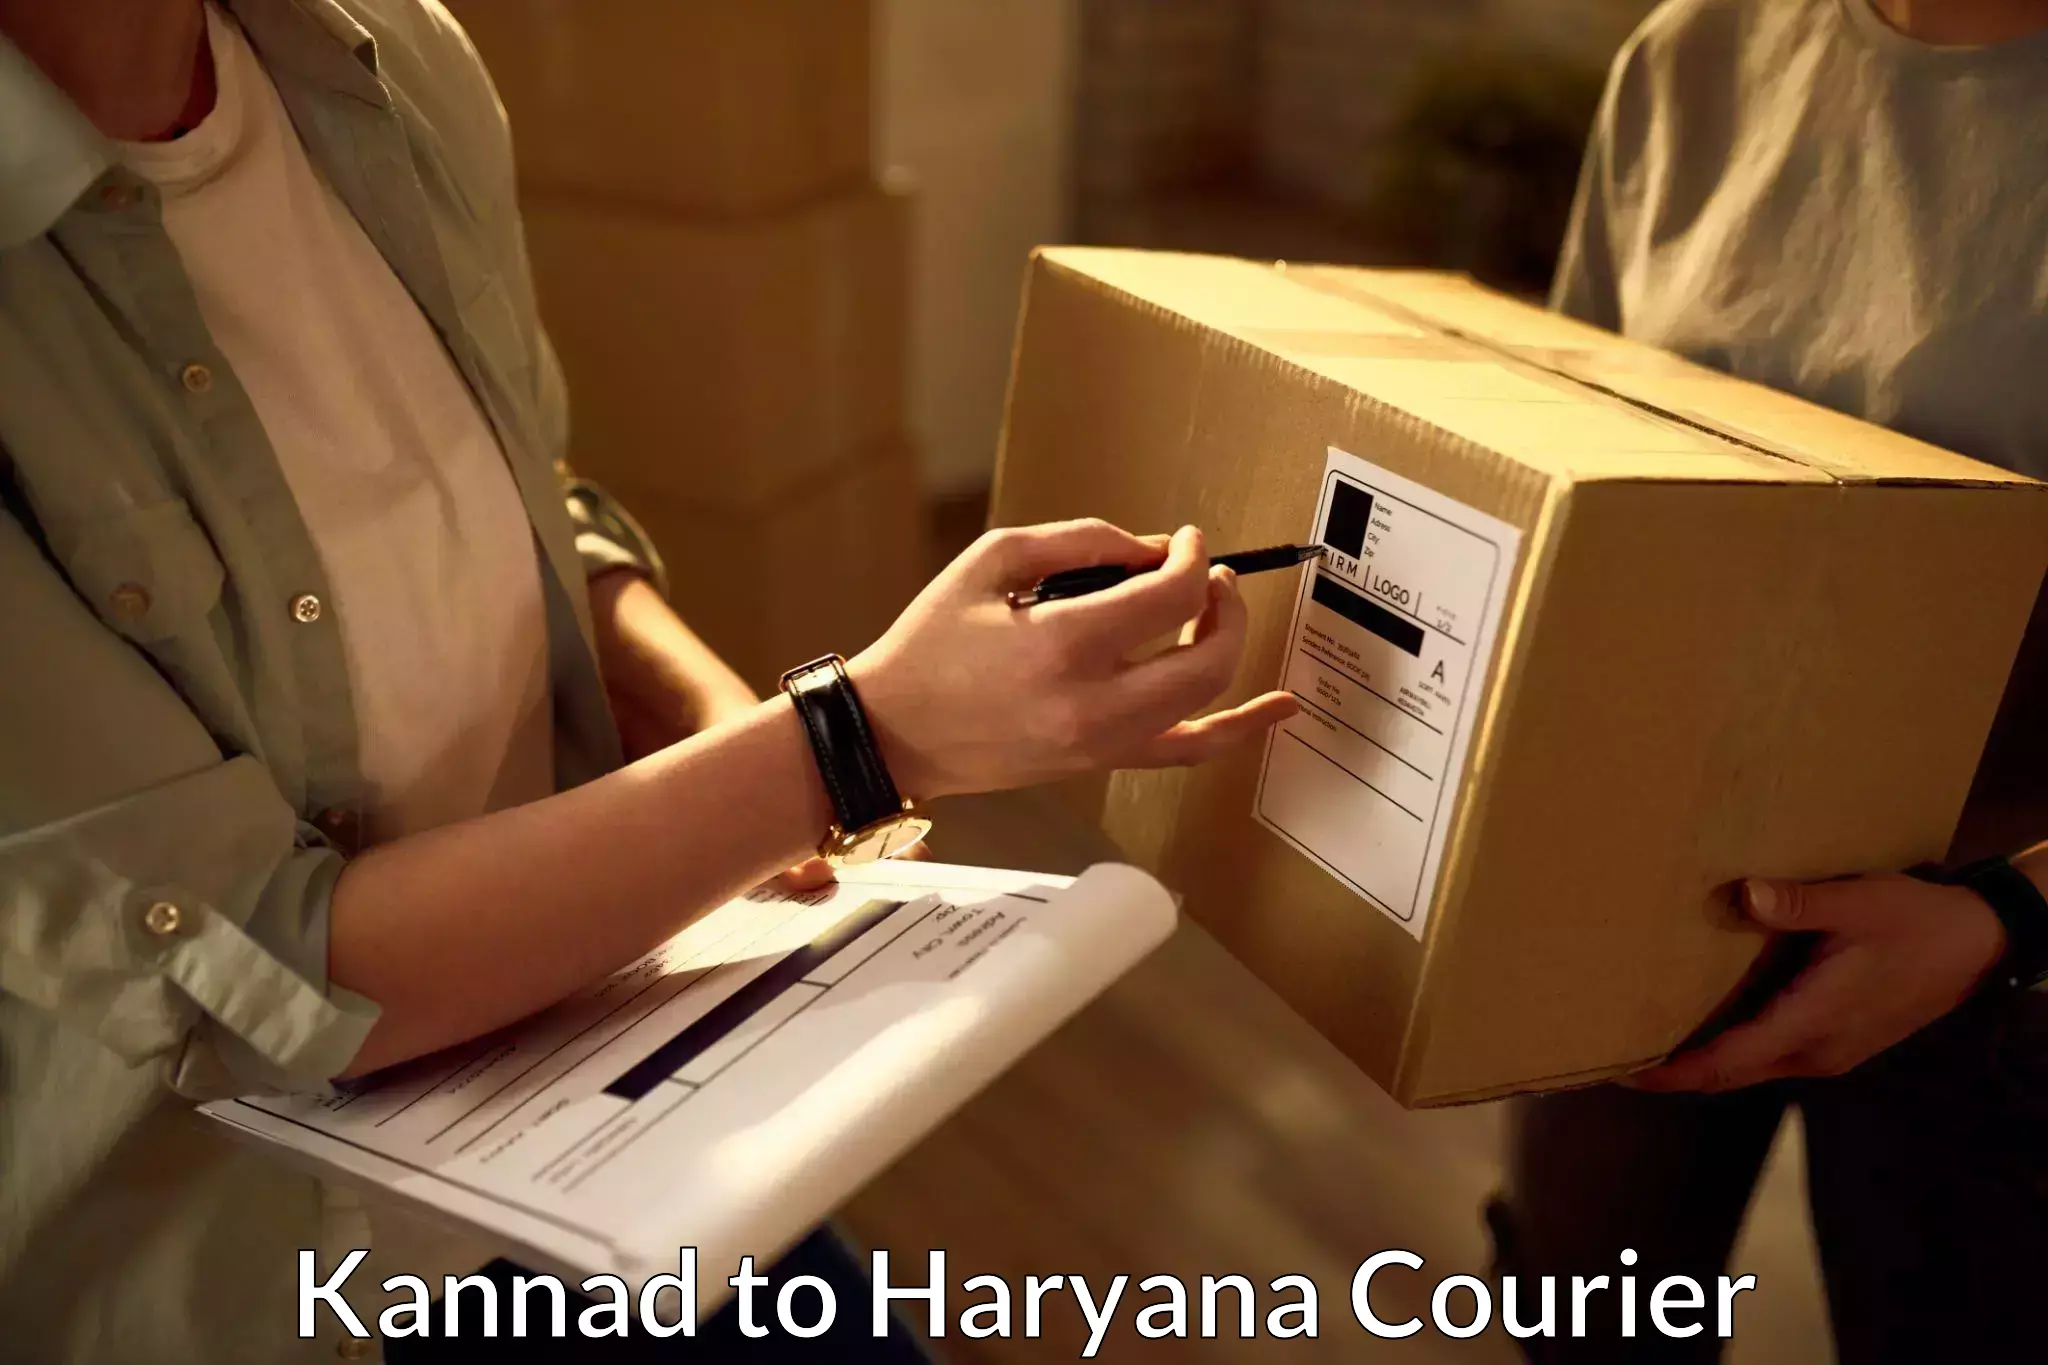 Business delivery service Kannad to NCR Haryana